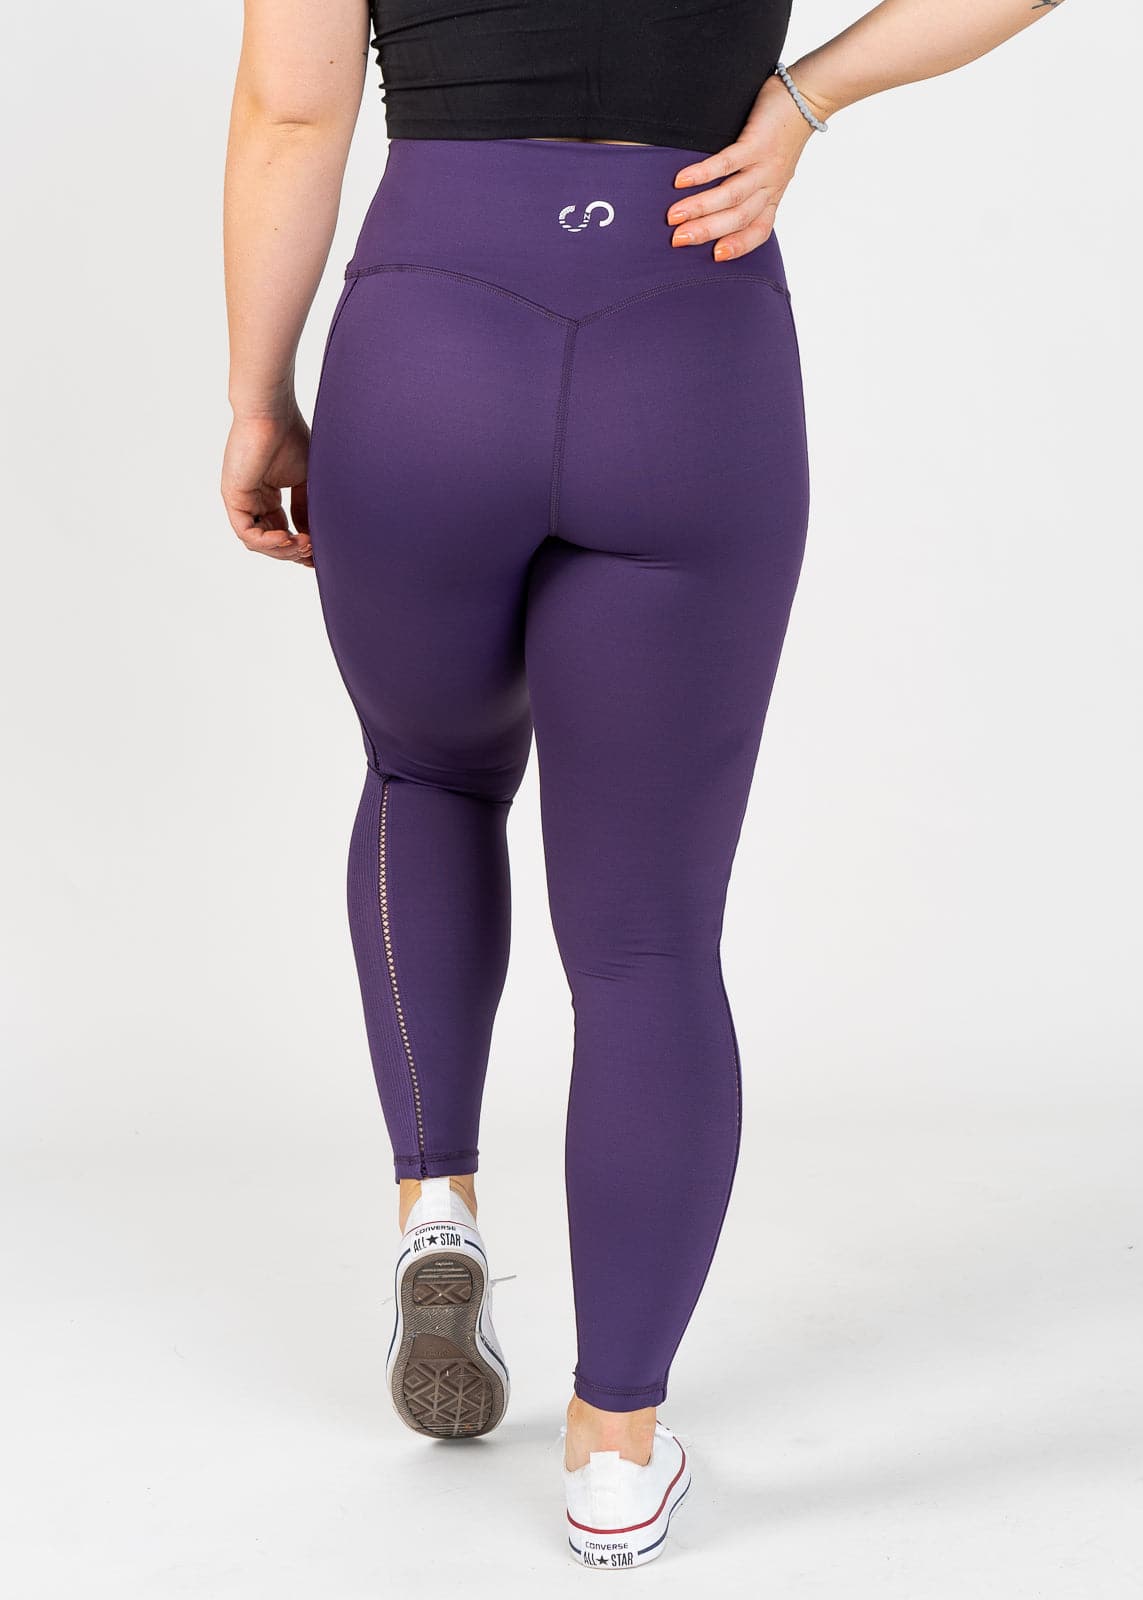 Chest Down Back View Wearing Empowered Leggings With Cut Outs | Purple